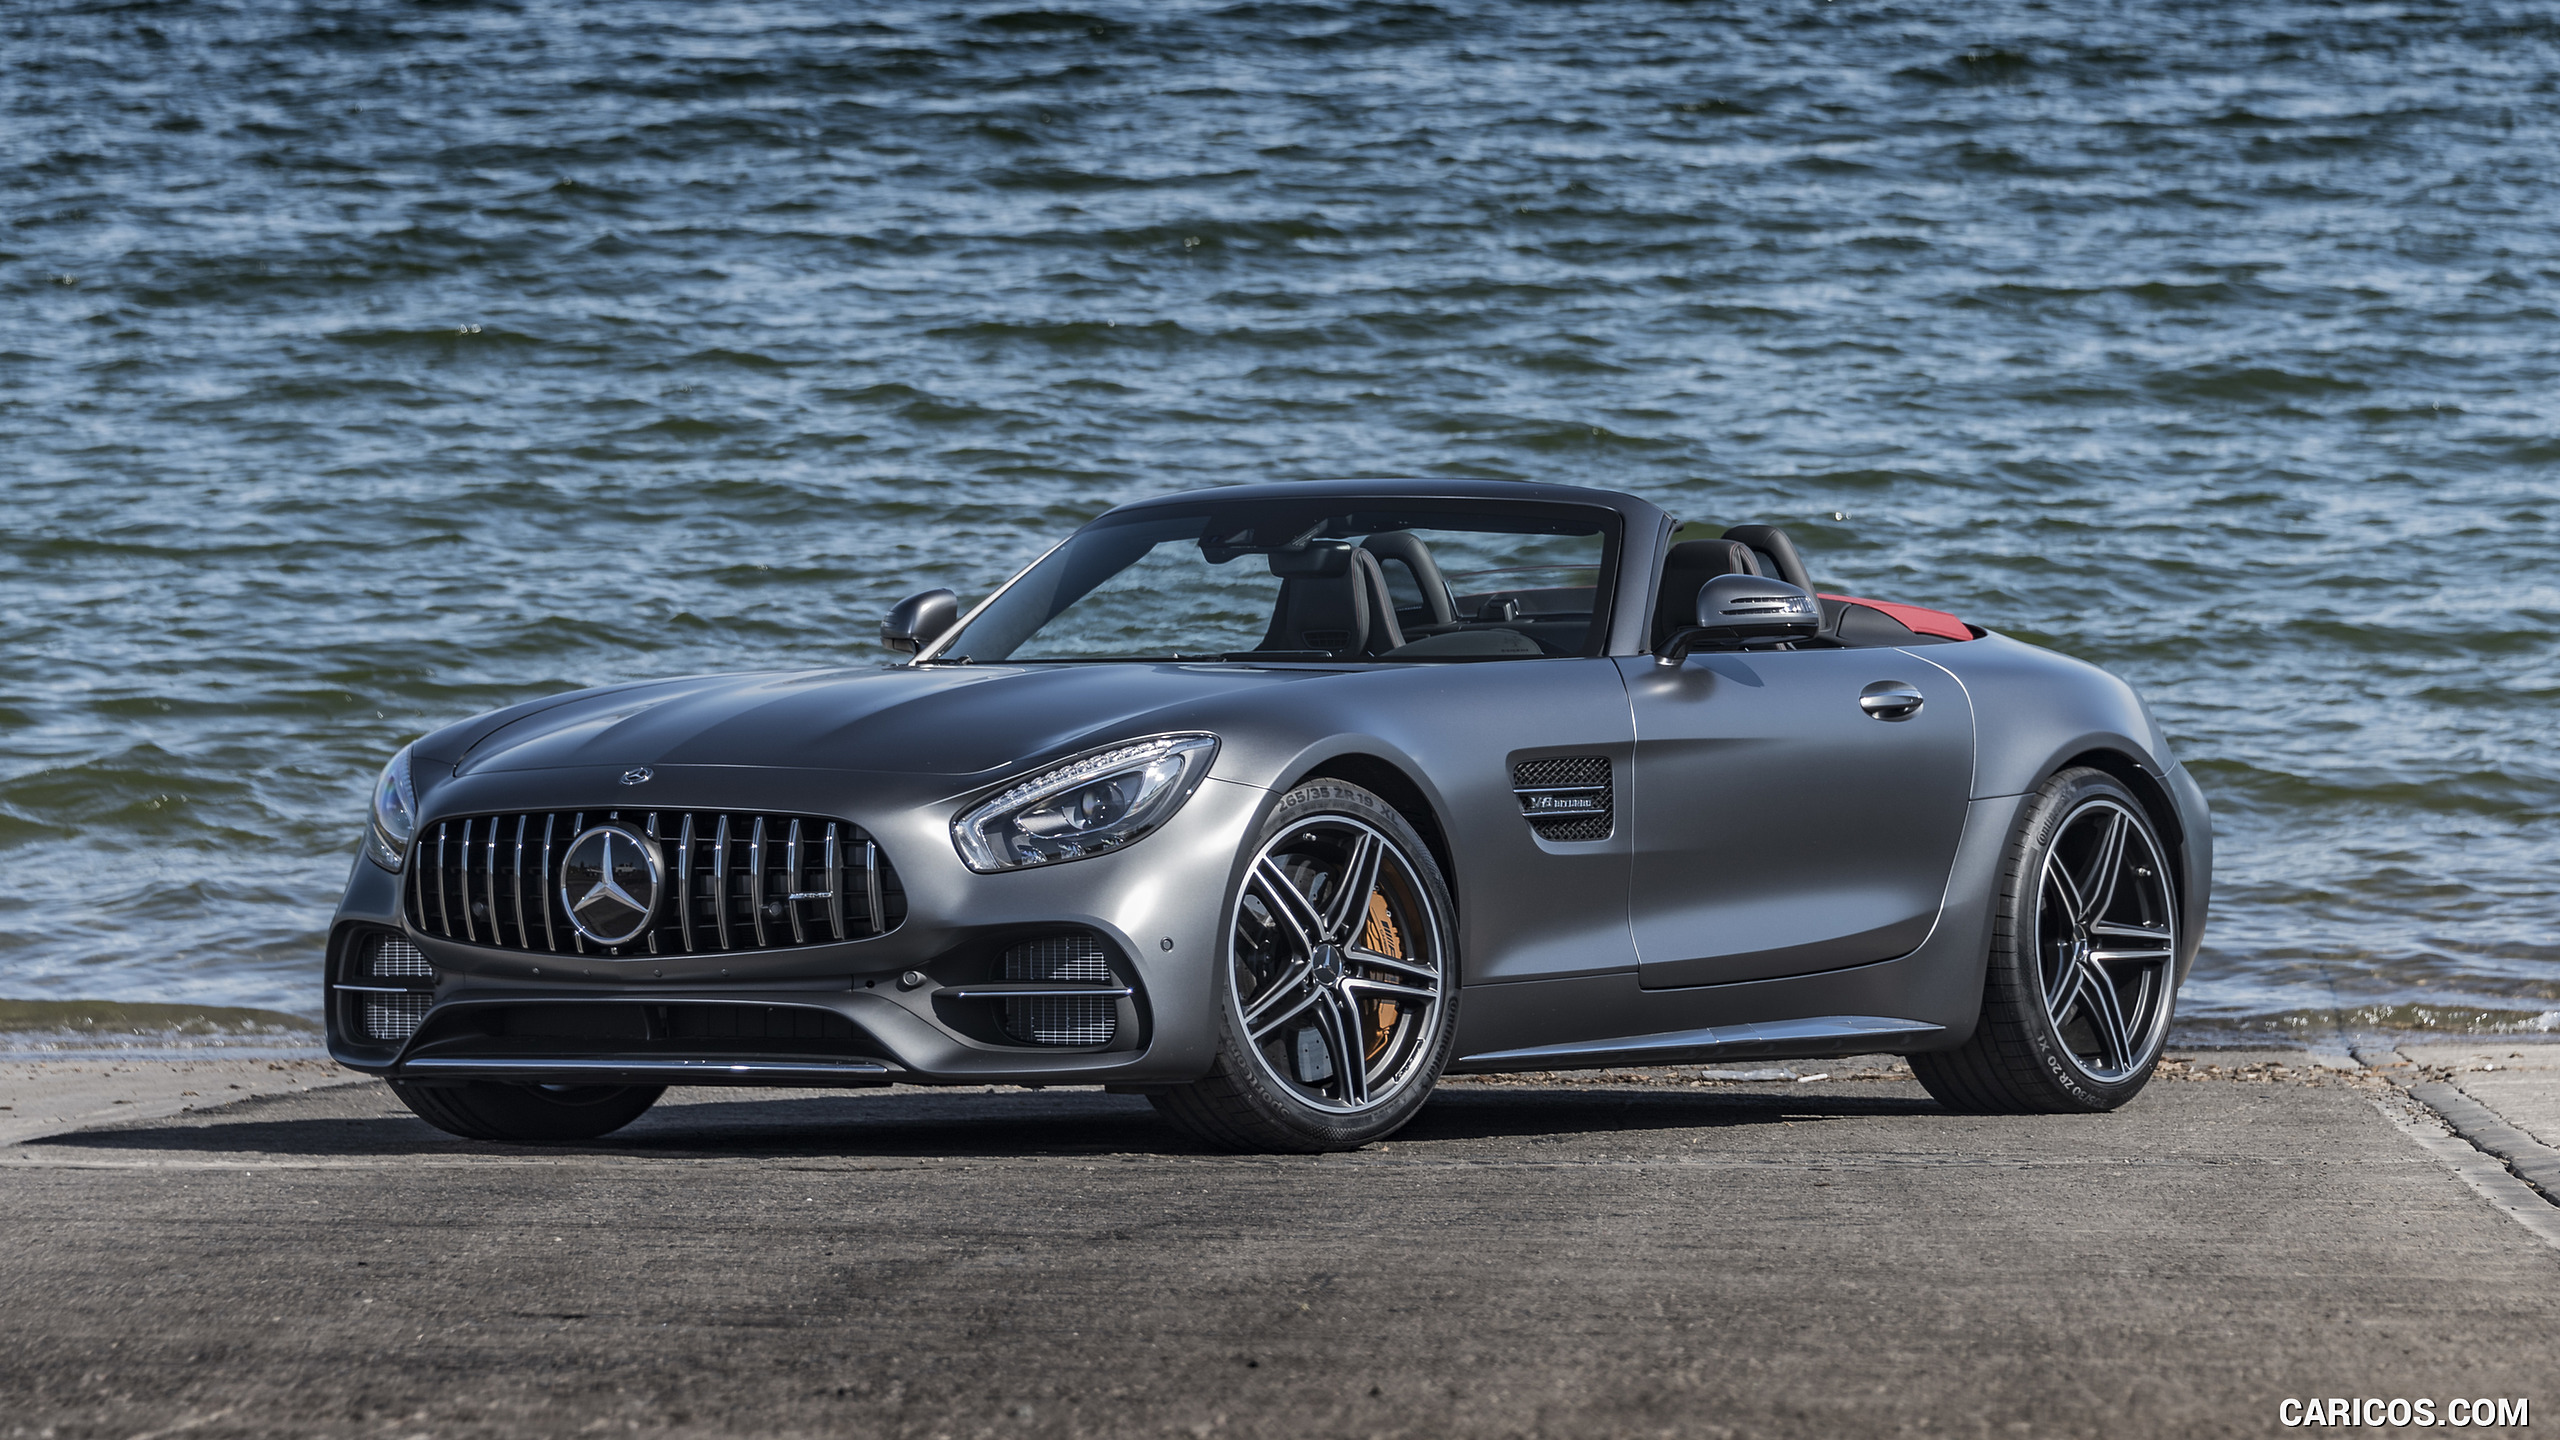 2018 Mercedes-AMG GT C Roadster - Front Three-Quarter, #300 of 350